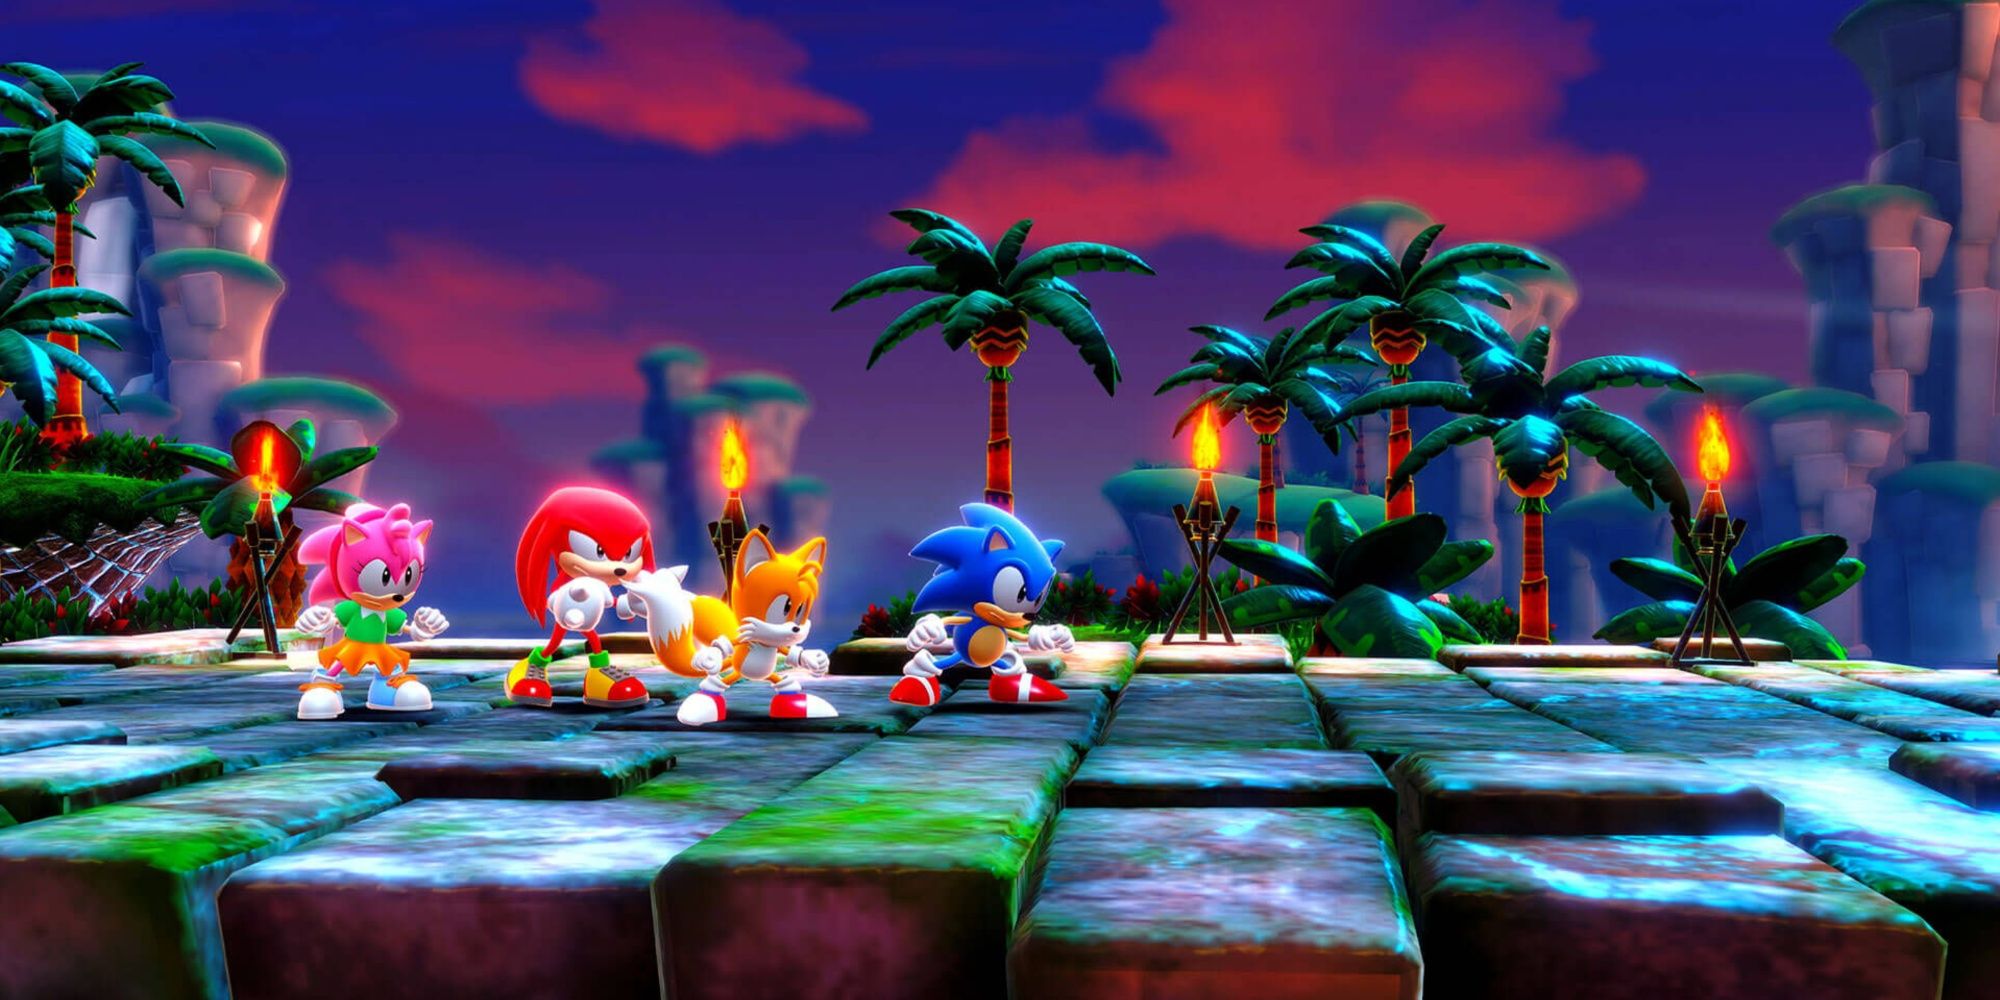 Análisis de Sonic Superstars para PS4, PS5, Xbox One, Xbox Series X, S,  Switch y PC